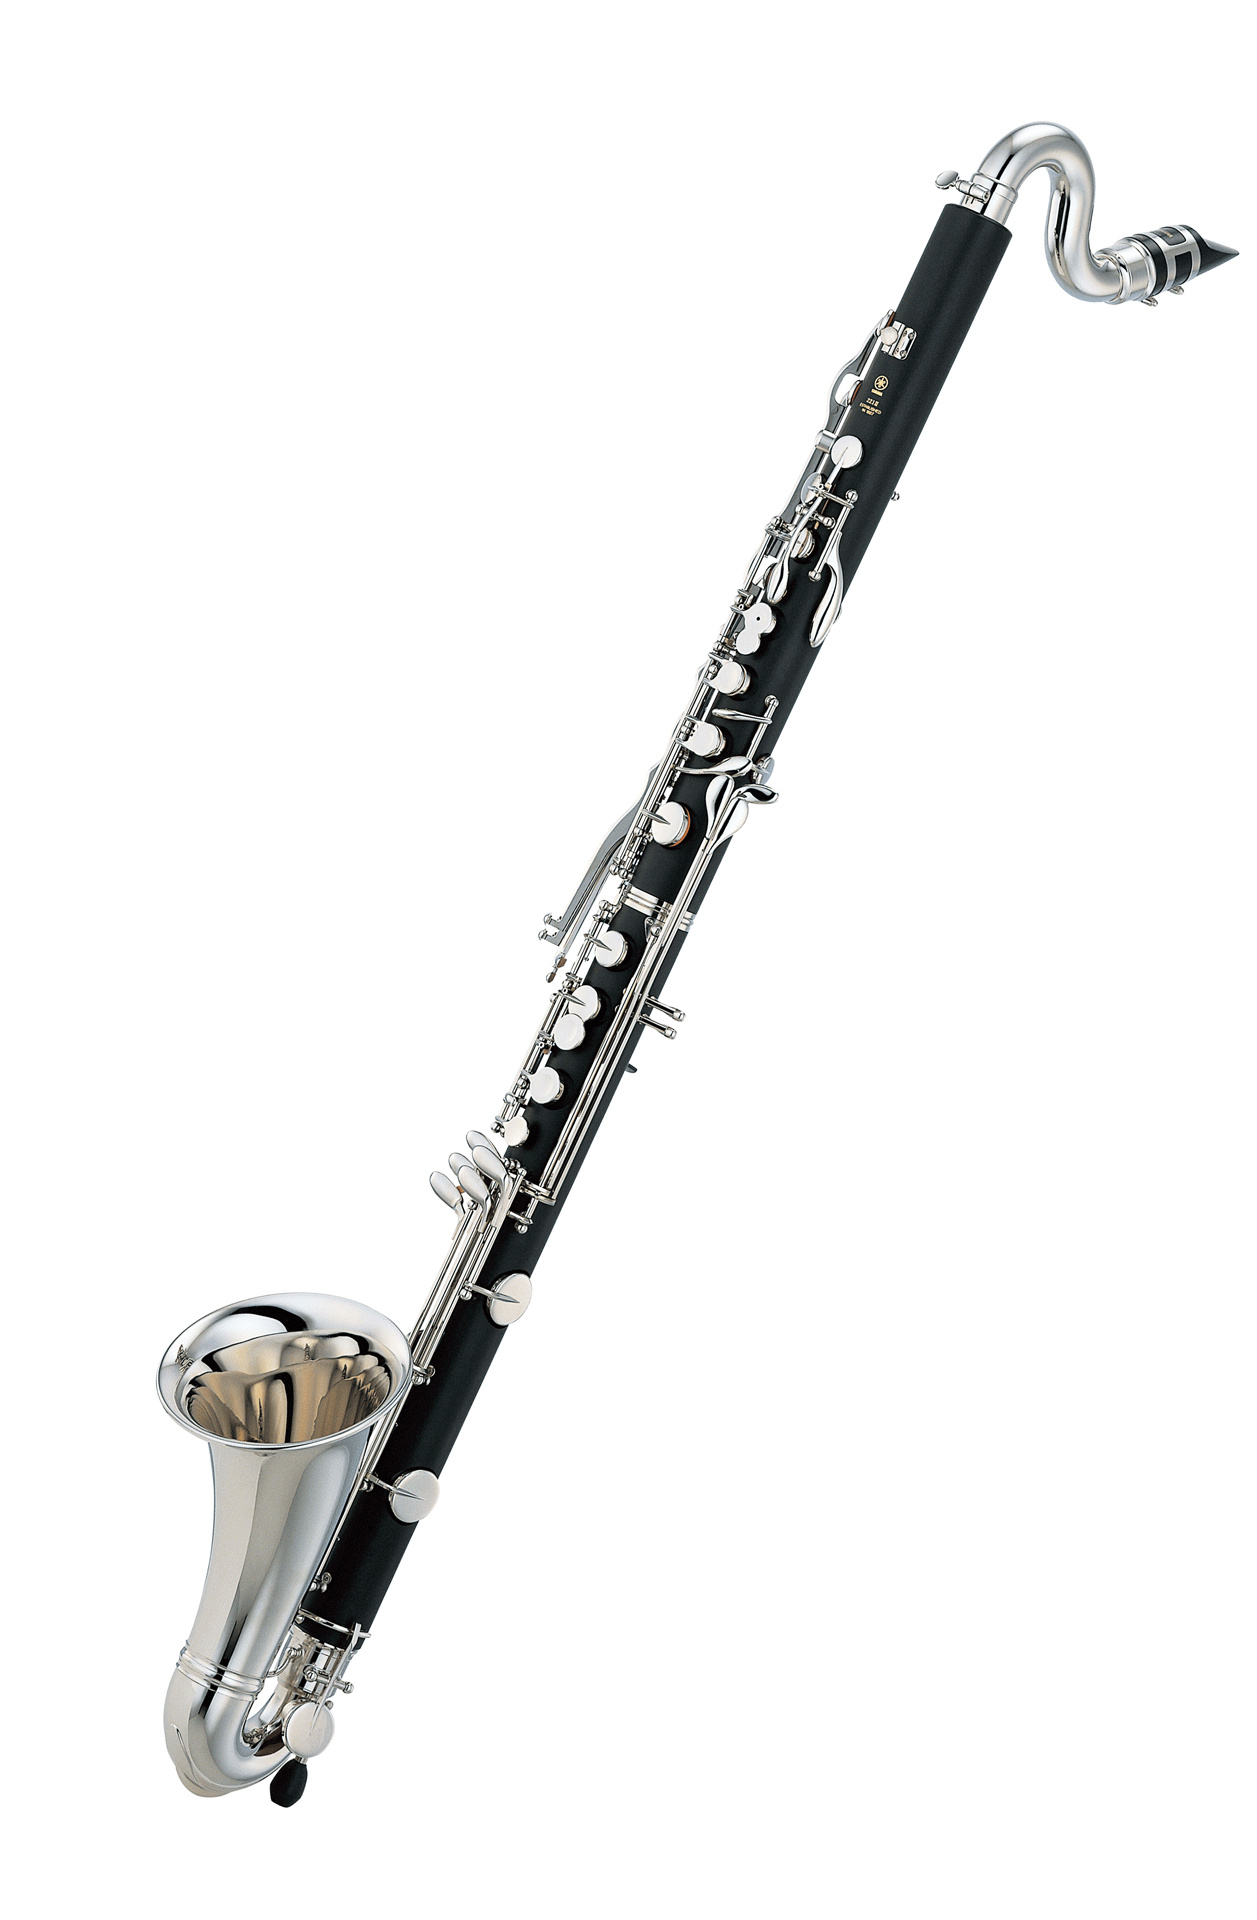 Clarinet: Yamaha Bb Bass Clarinet YCL-221S, Boehm system, 20 keys, 7 covered finger holes, ABS resin model. 1260x1920 HD Wallpaper.